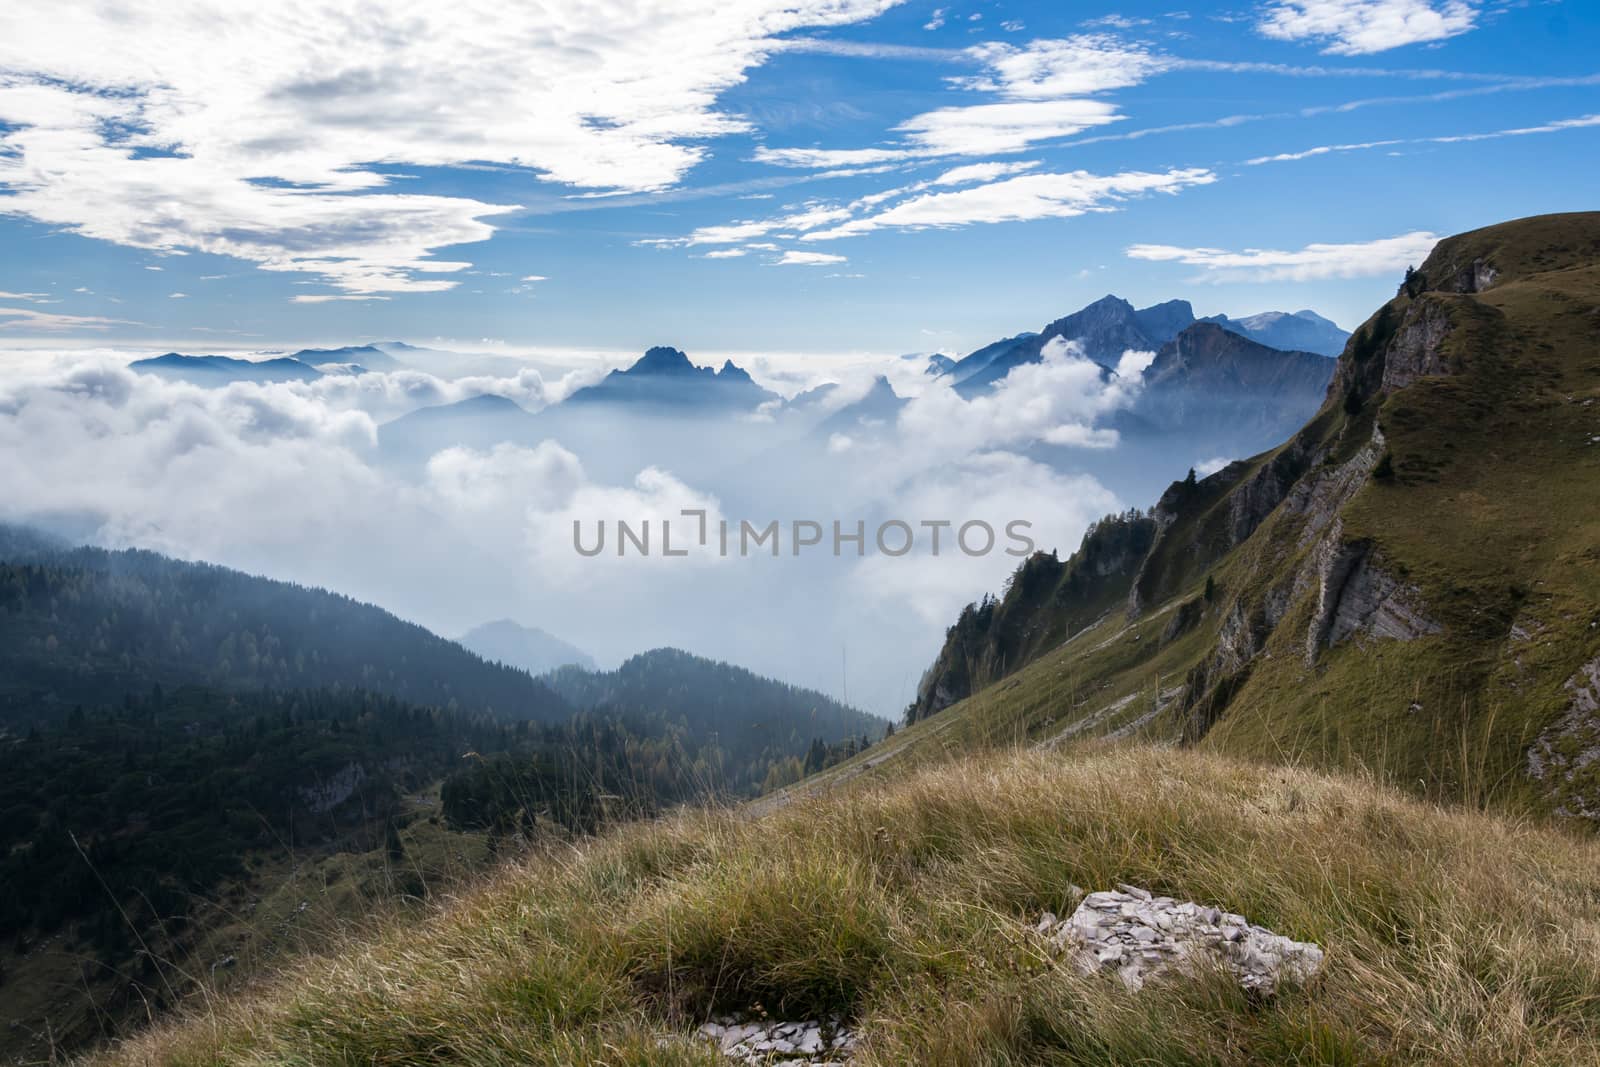 Italian dolomites during a sunny day with a sea of clouds